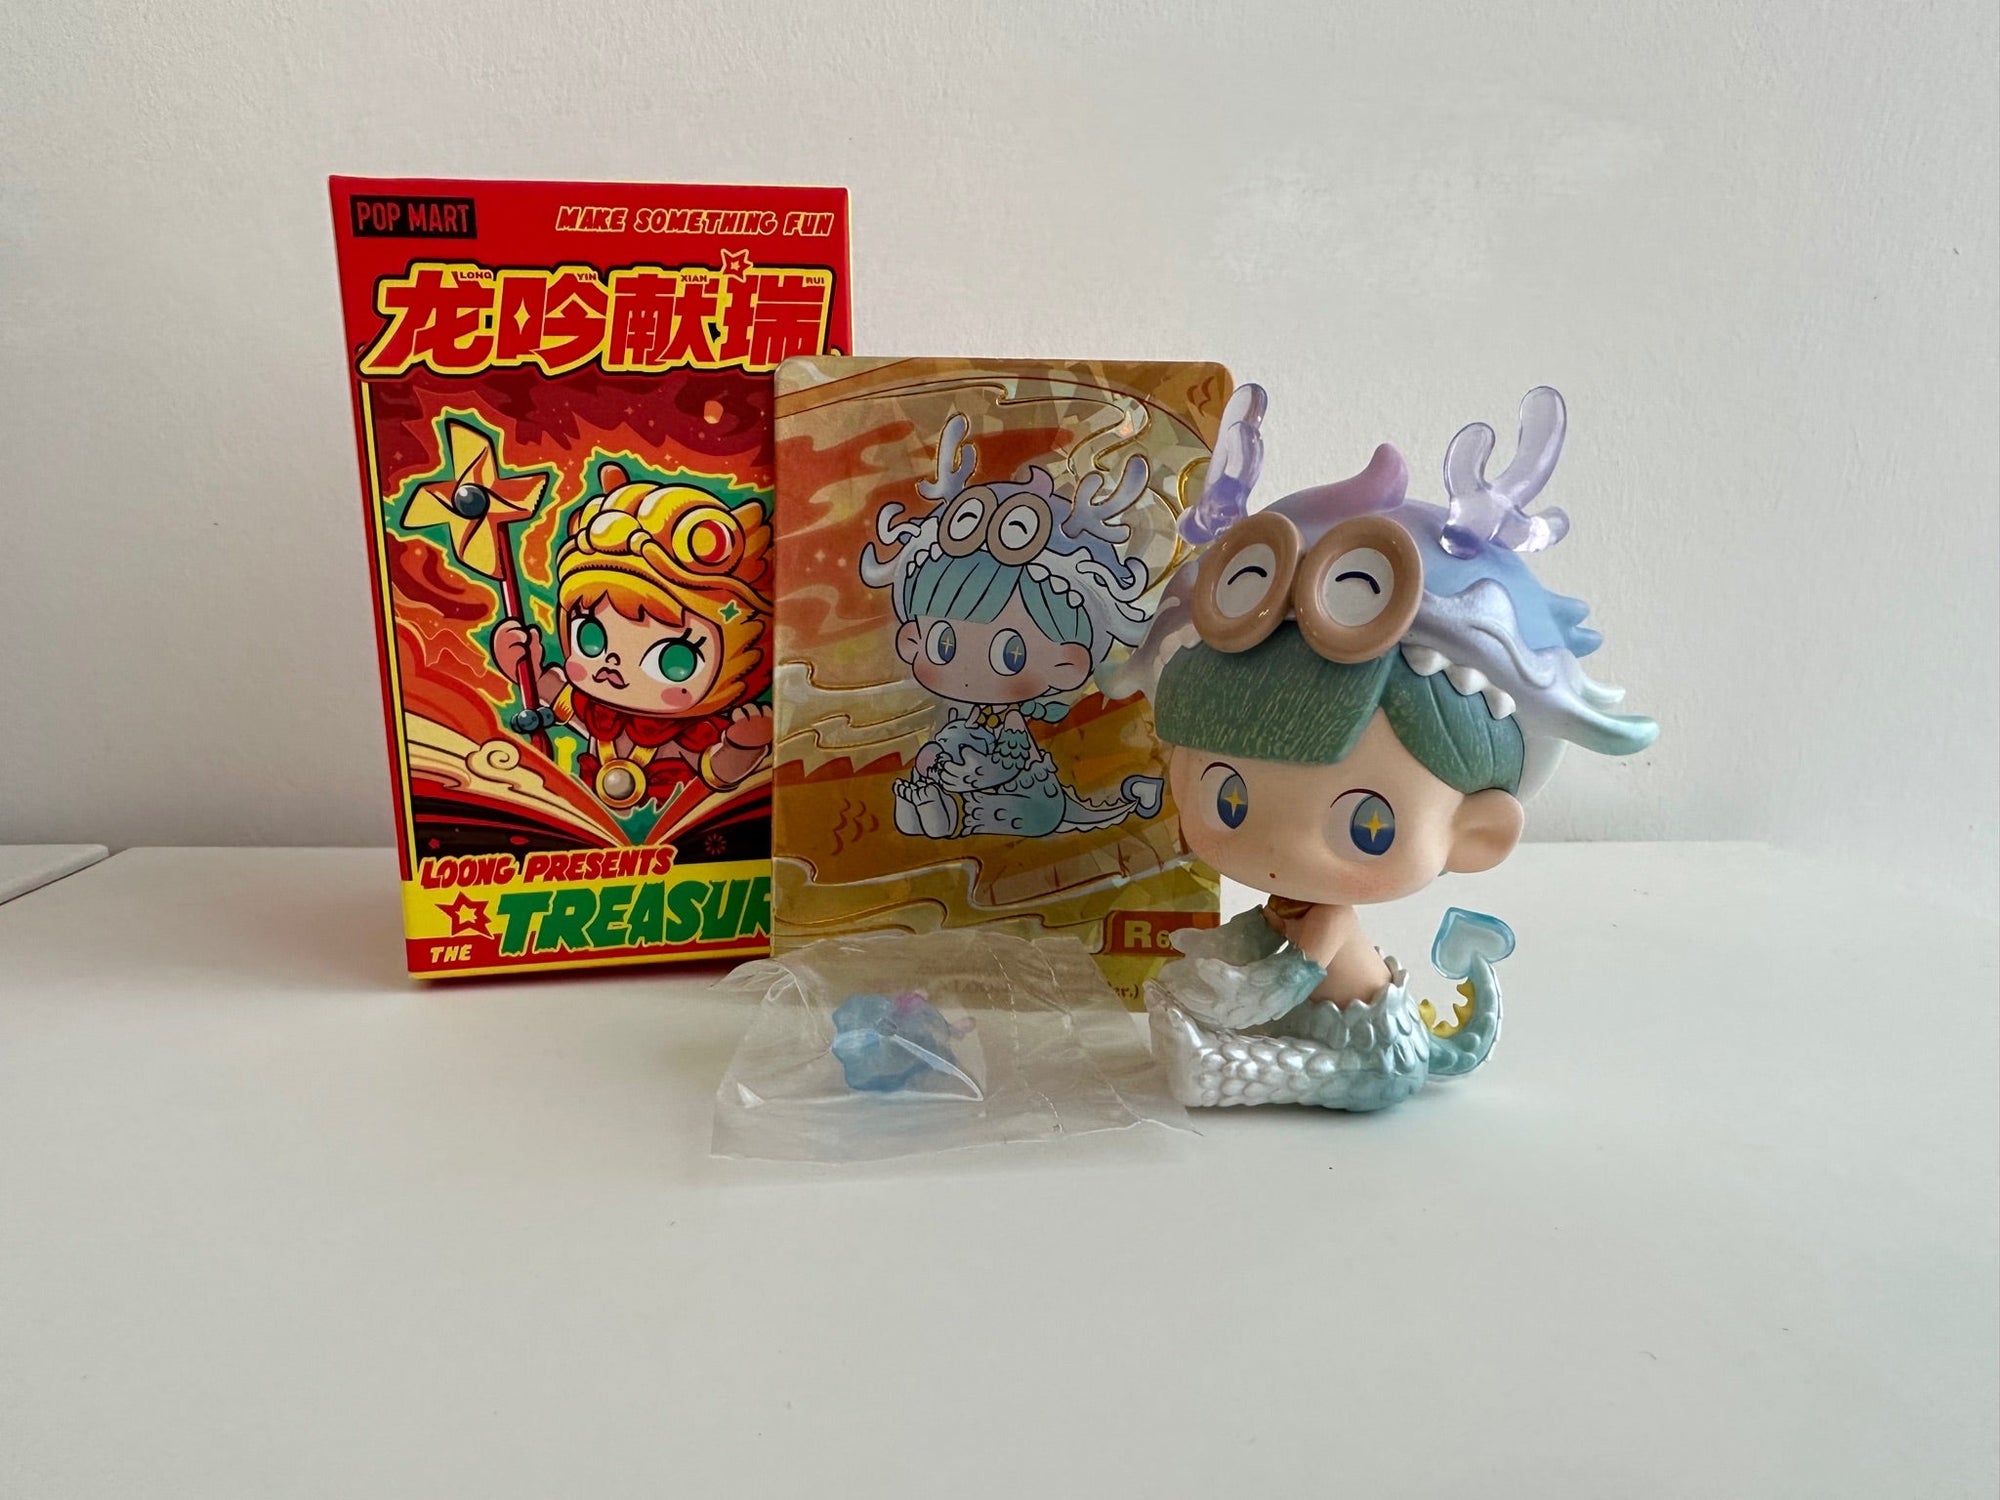 (LiLios) Never A Loong (Special Version) - Loong Presents the Treasure Series Figures by POP MART - 1